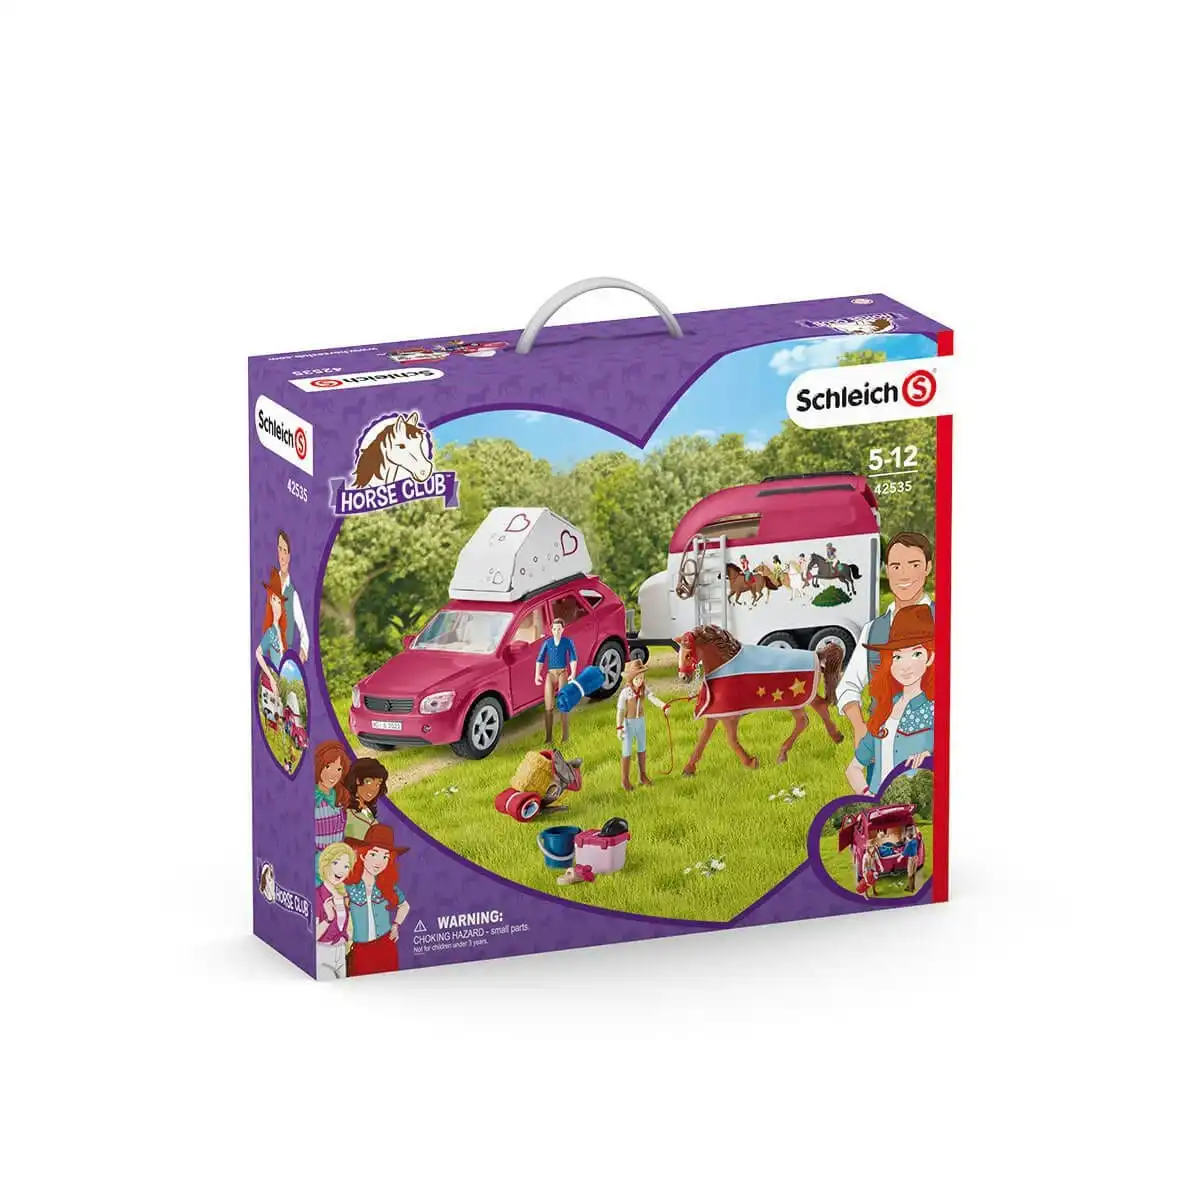 Schleich - Horse Adventures With Car And Trailer Animal Figurine Playset